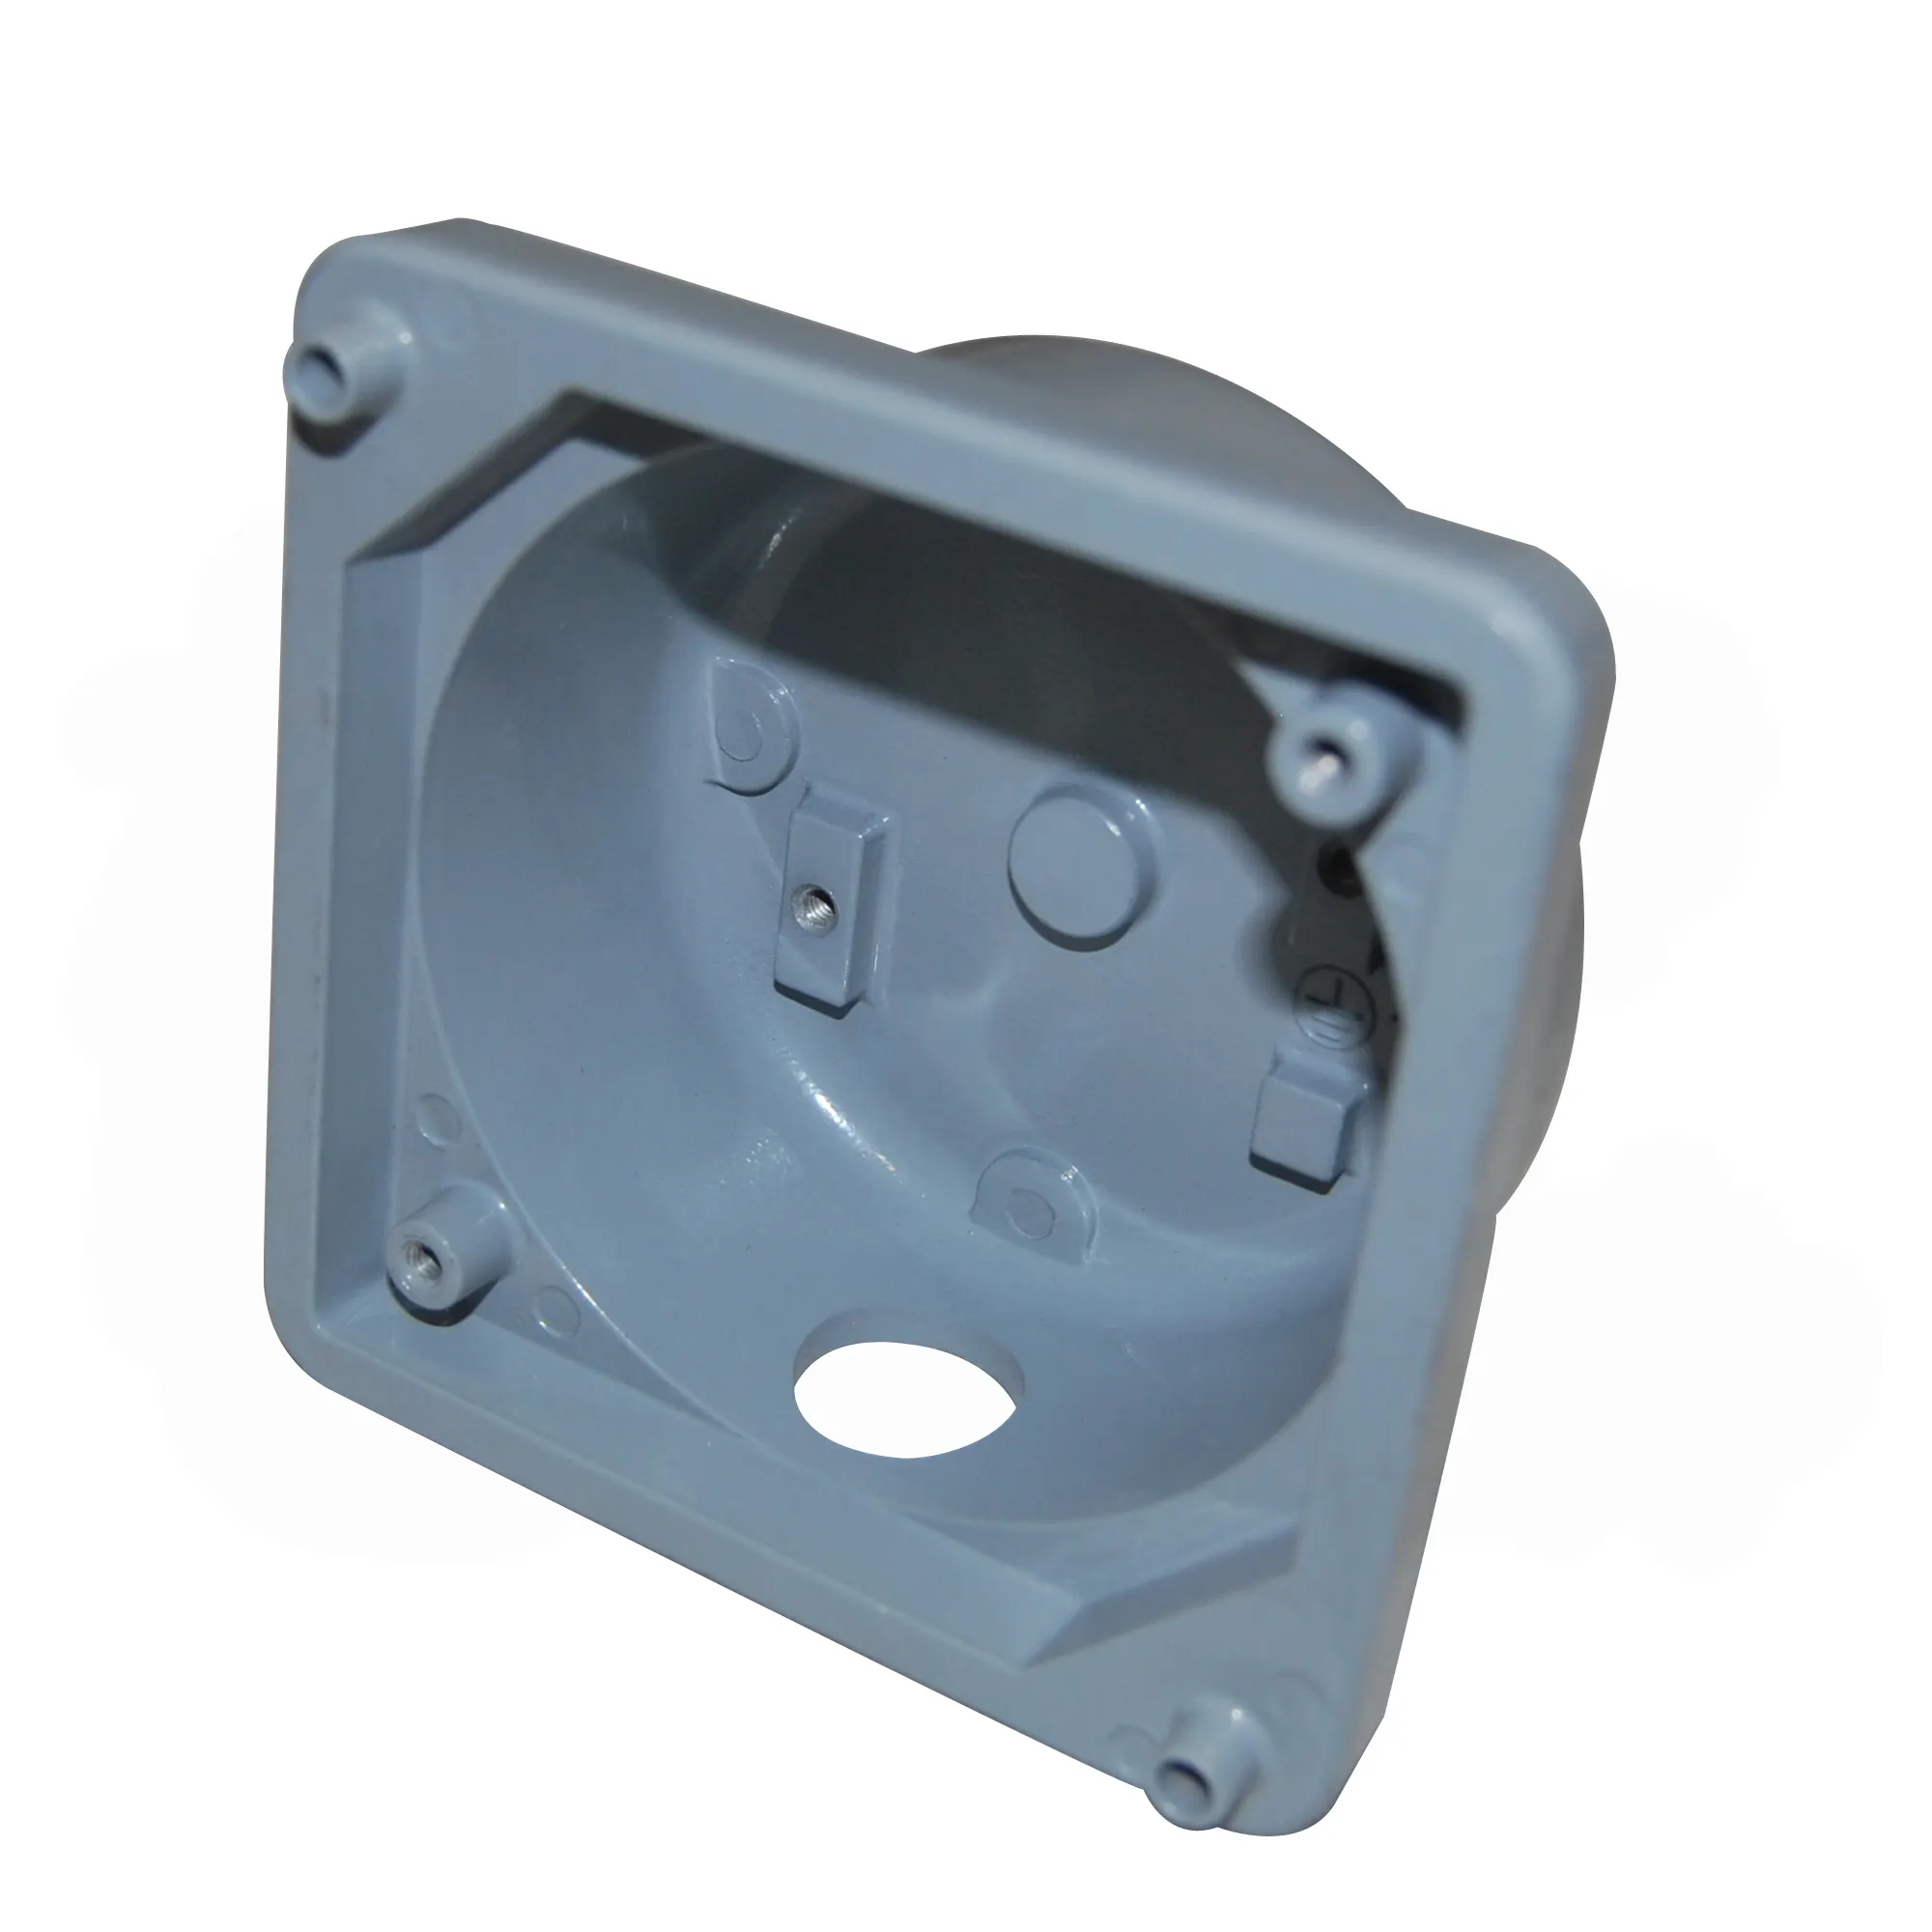 China Supplier Foundry Custom Made Die Casting Aluminum Alloy Shell